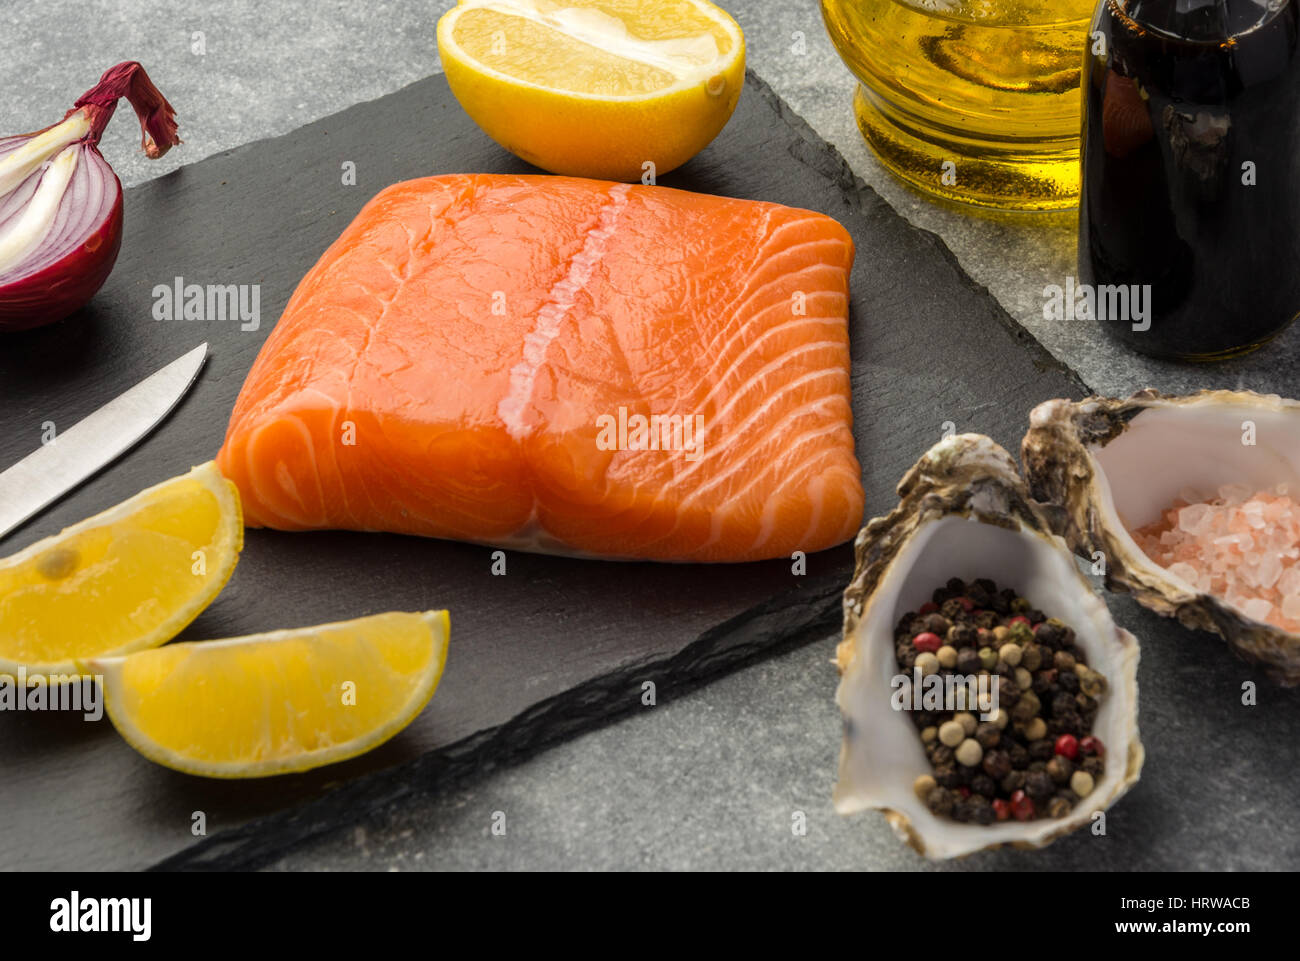 Ingredients for tartare sauce from a salmon, rich in omega 3 oil, with aromatic herbs and spices with a lemon, tomato, garlic on black background. Hea Stock Photo